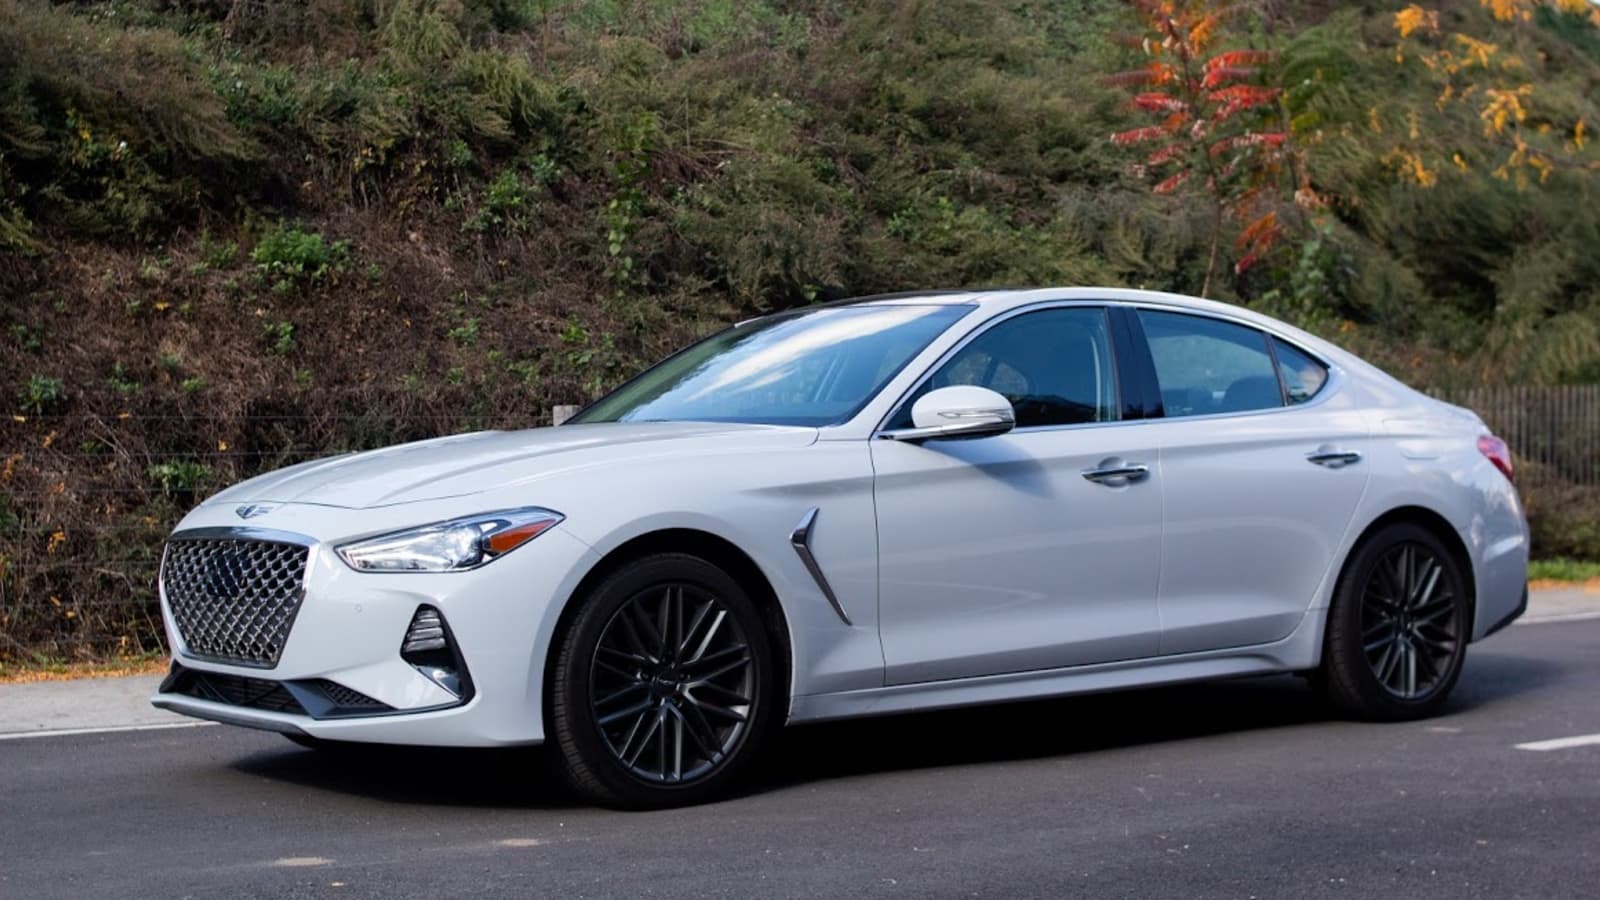 2020 Genesis G70 Review: The best sports sedan you can buy